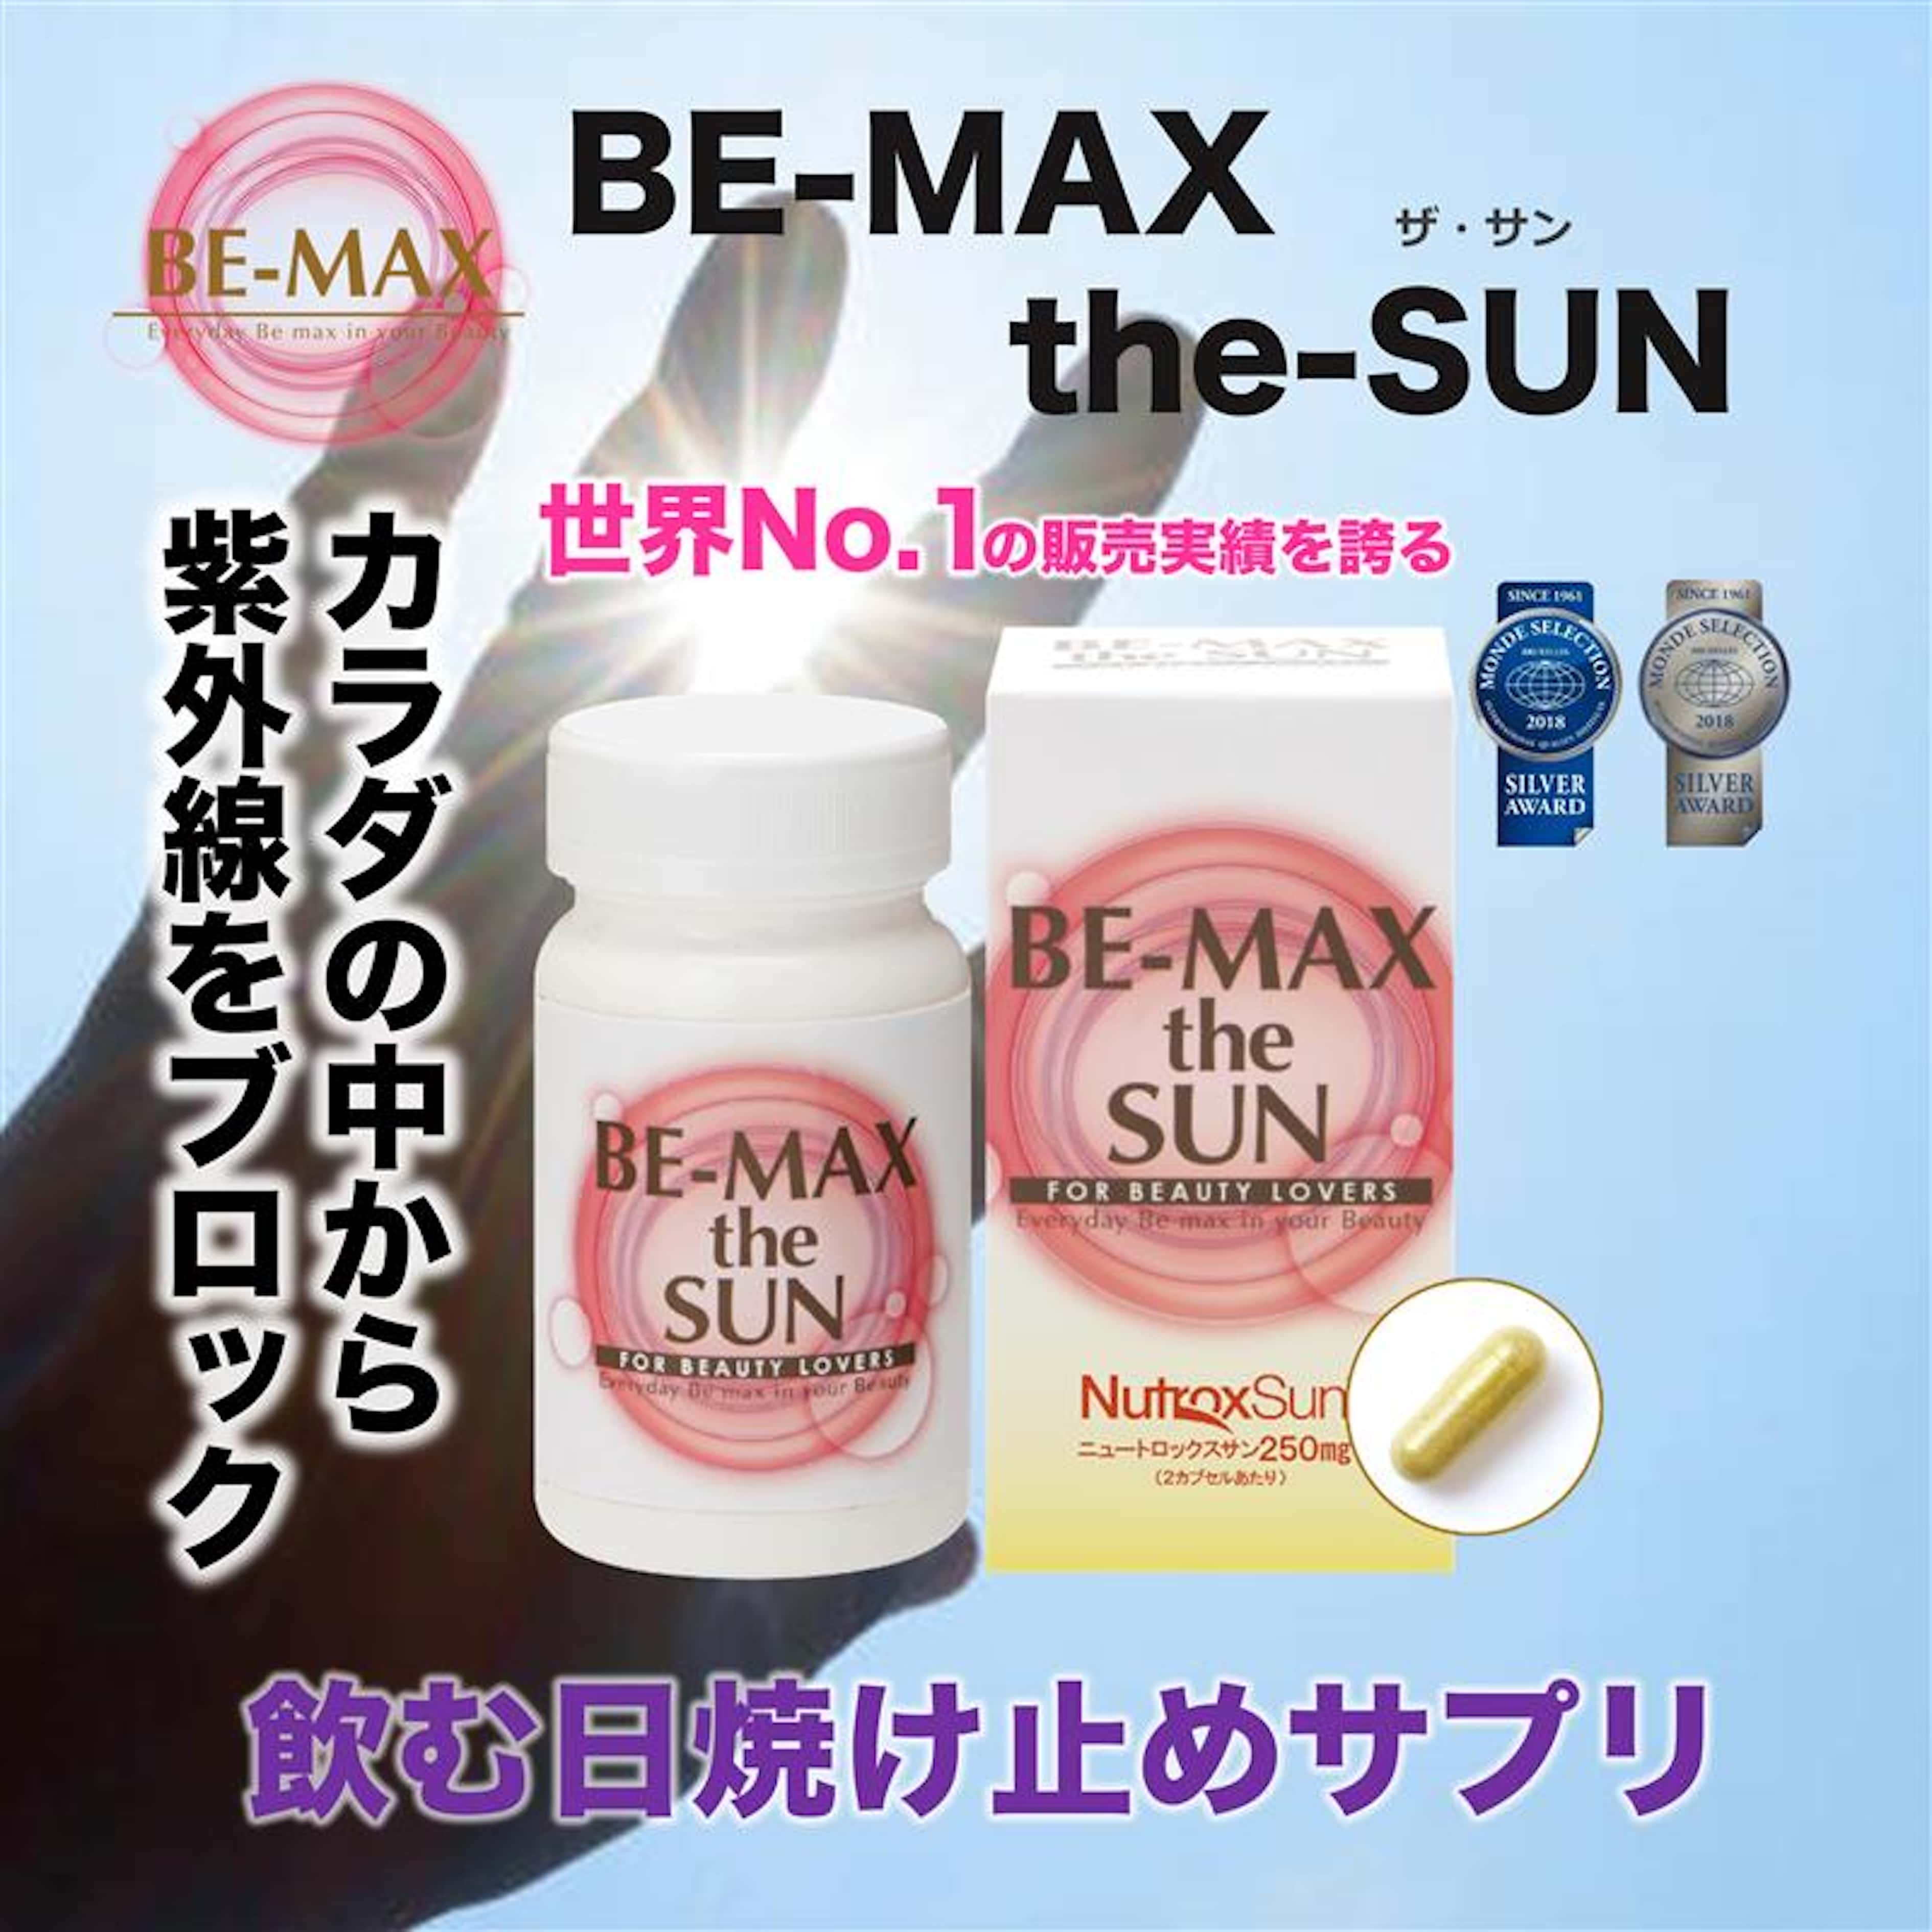 【BE-MAX】 the SUN